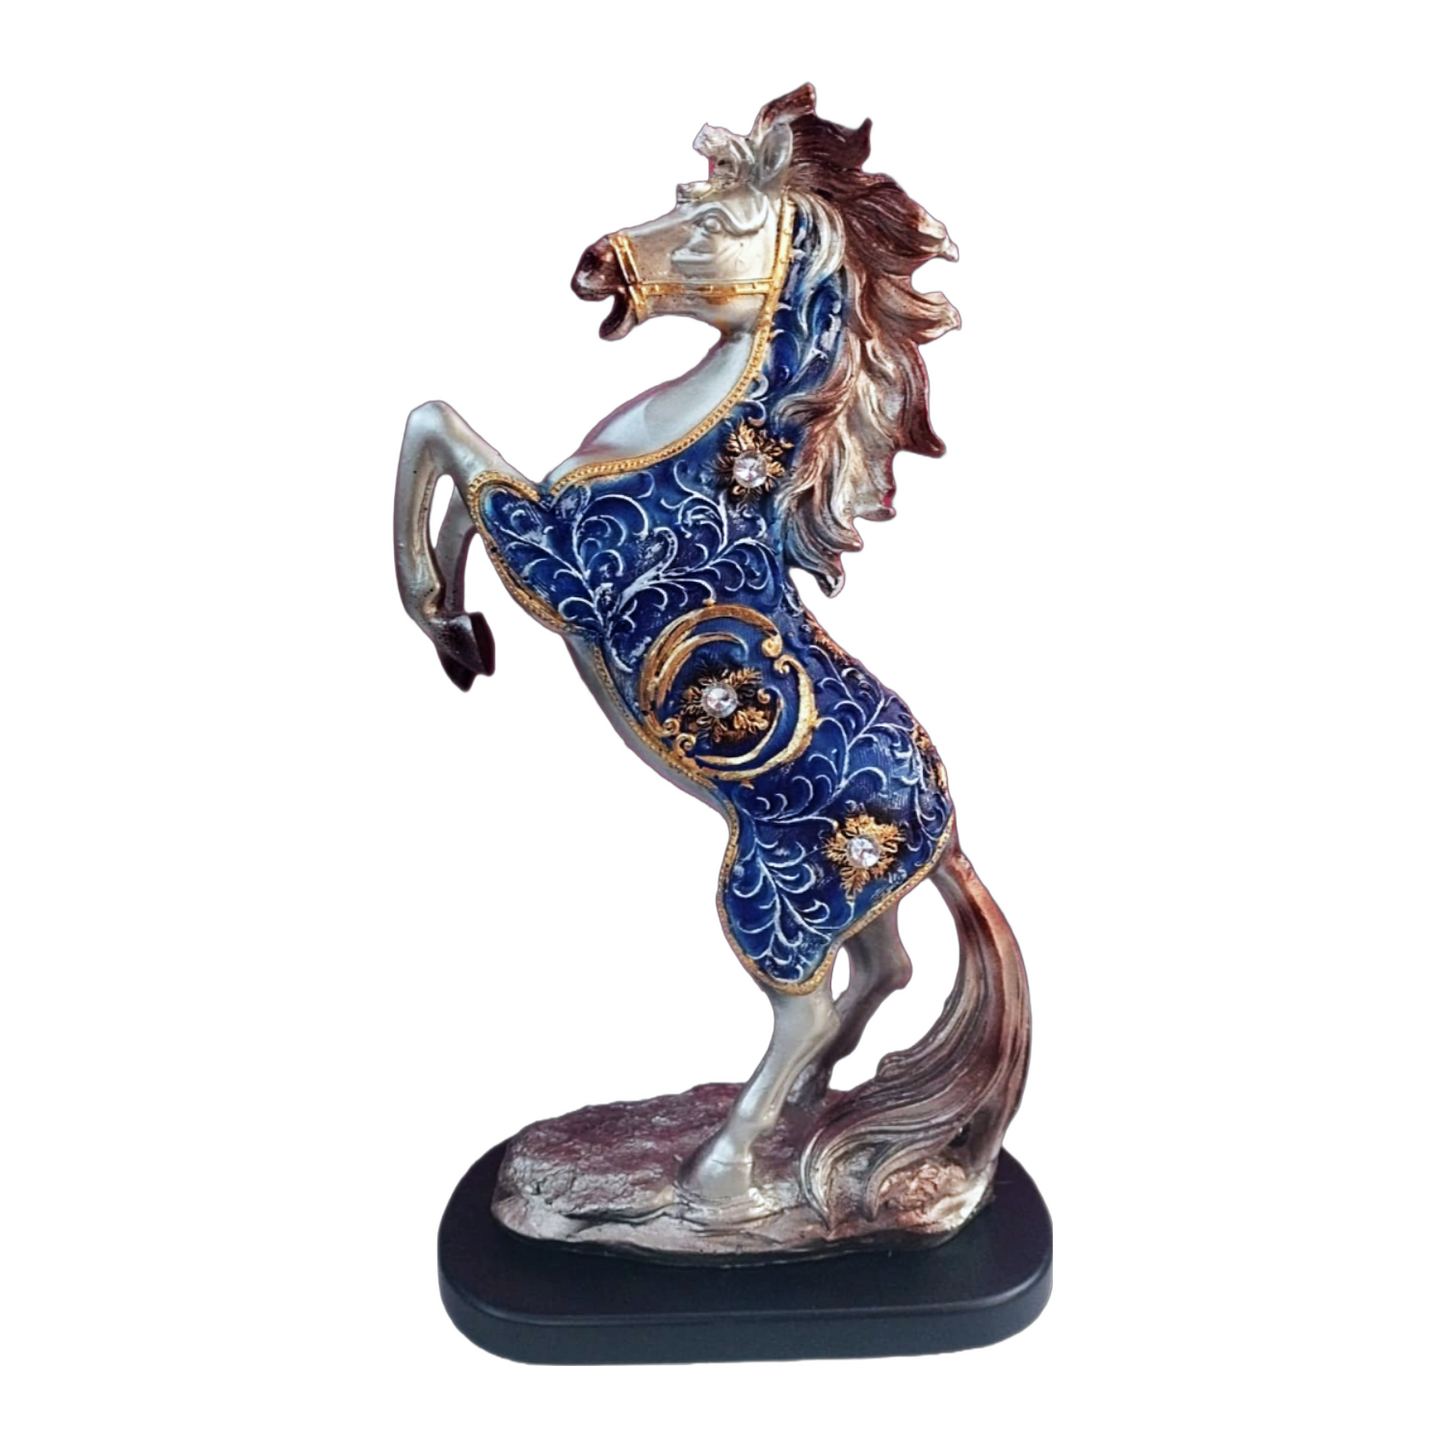 Statue ALiLA Jumping Horse in Antique Designer Exclusive Showpiece Idol Statue for Gifting & Home Table Decoration, 13 inch Height… Statue